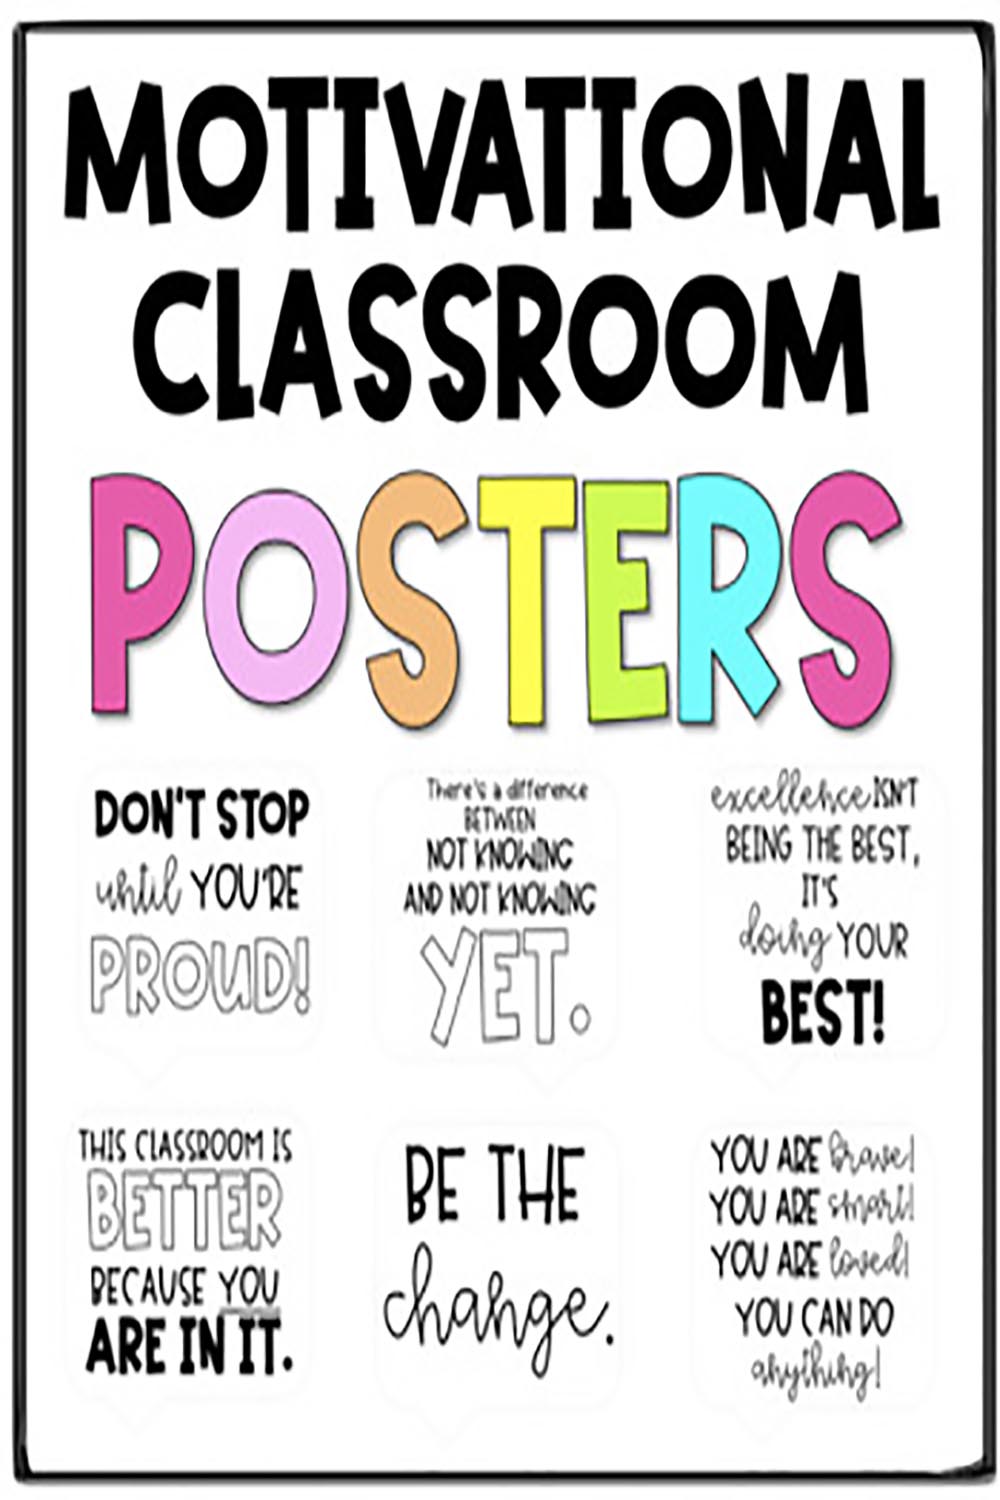 MOTIVATIONAL CLASSROOM POSTERS 20 pinterest preview image.